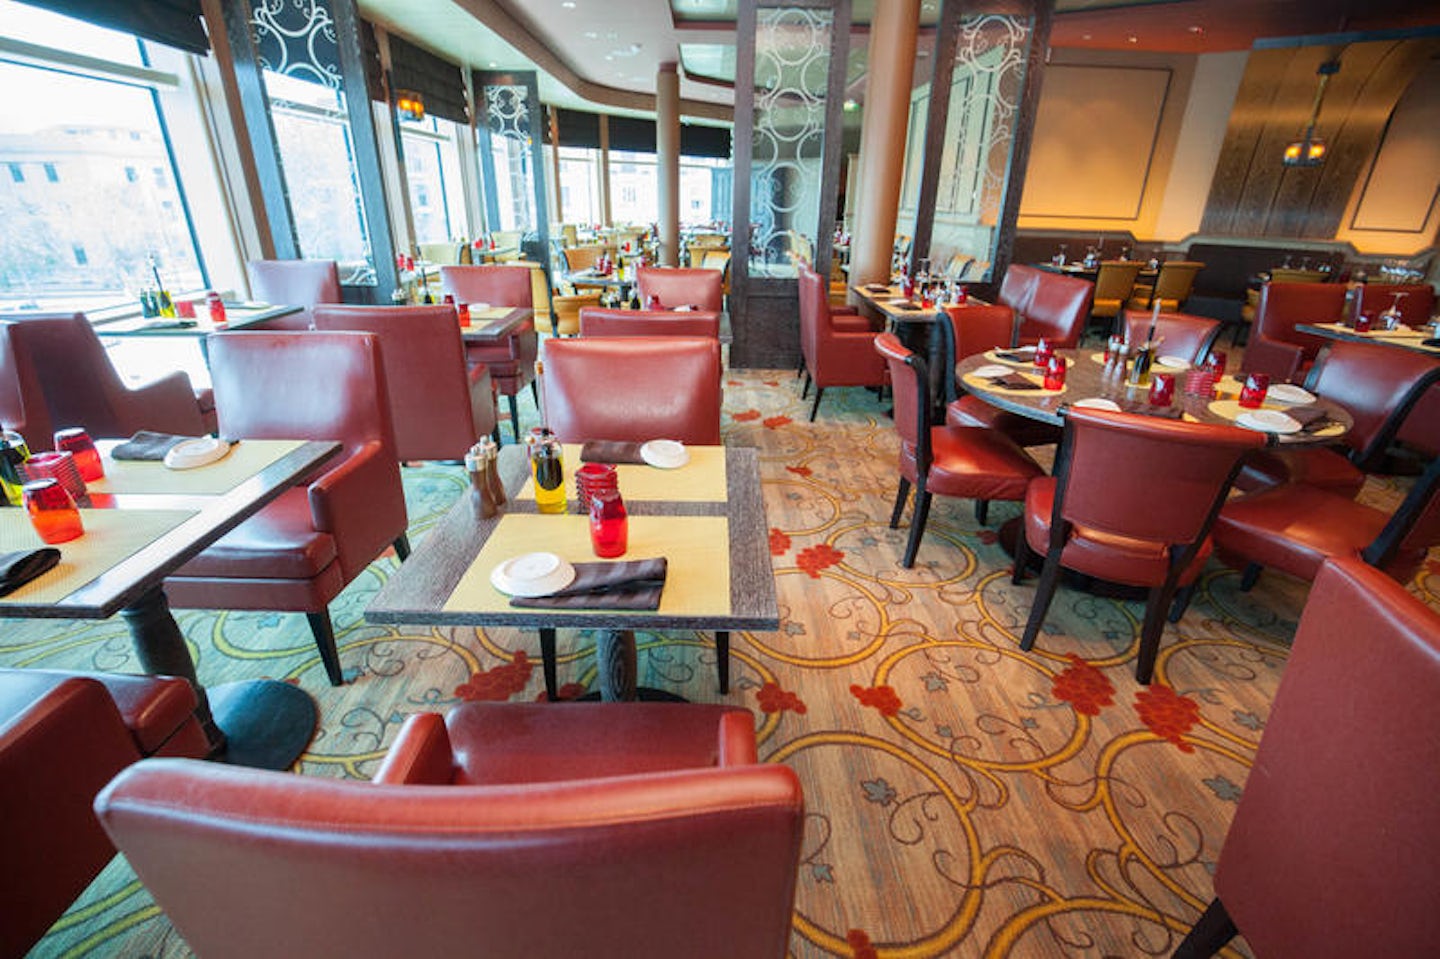 Tuscan Grille on Celebrity Reflection